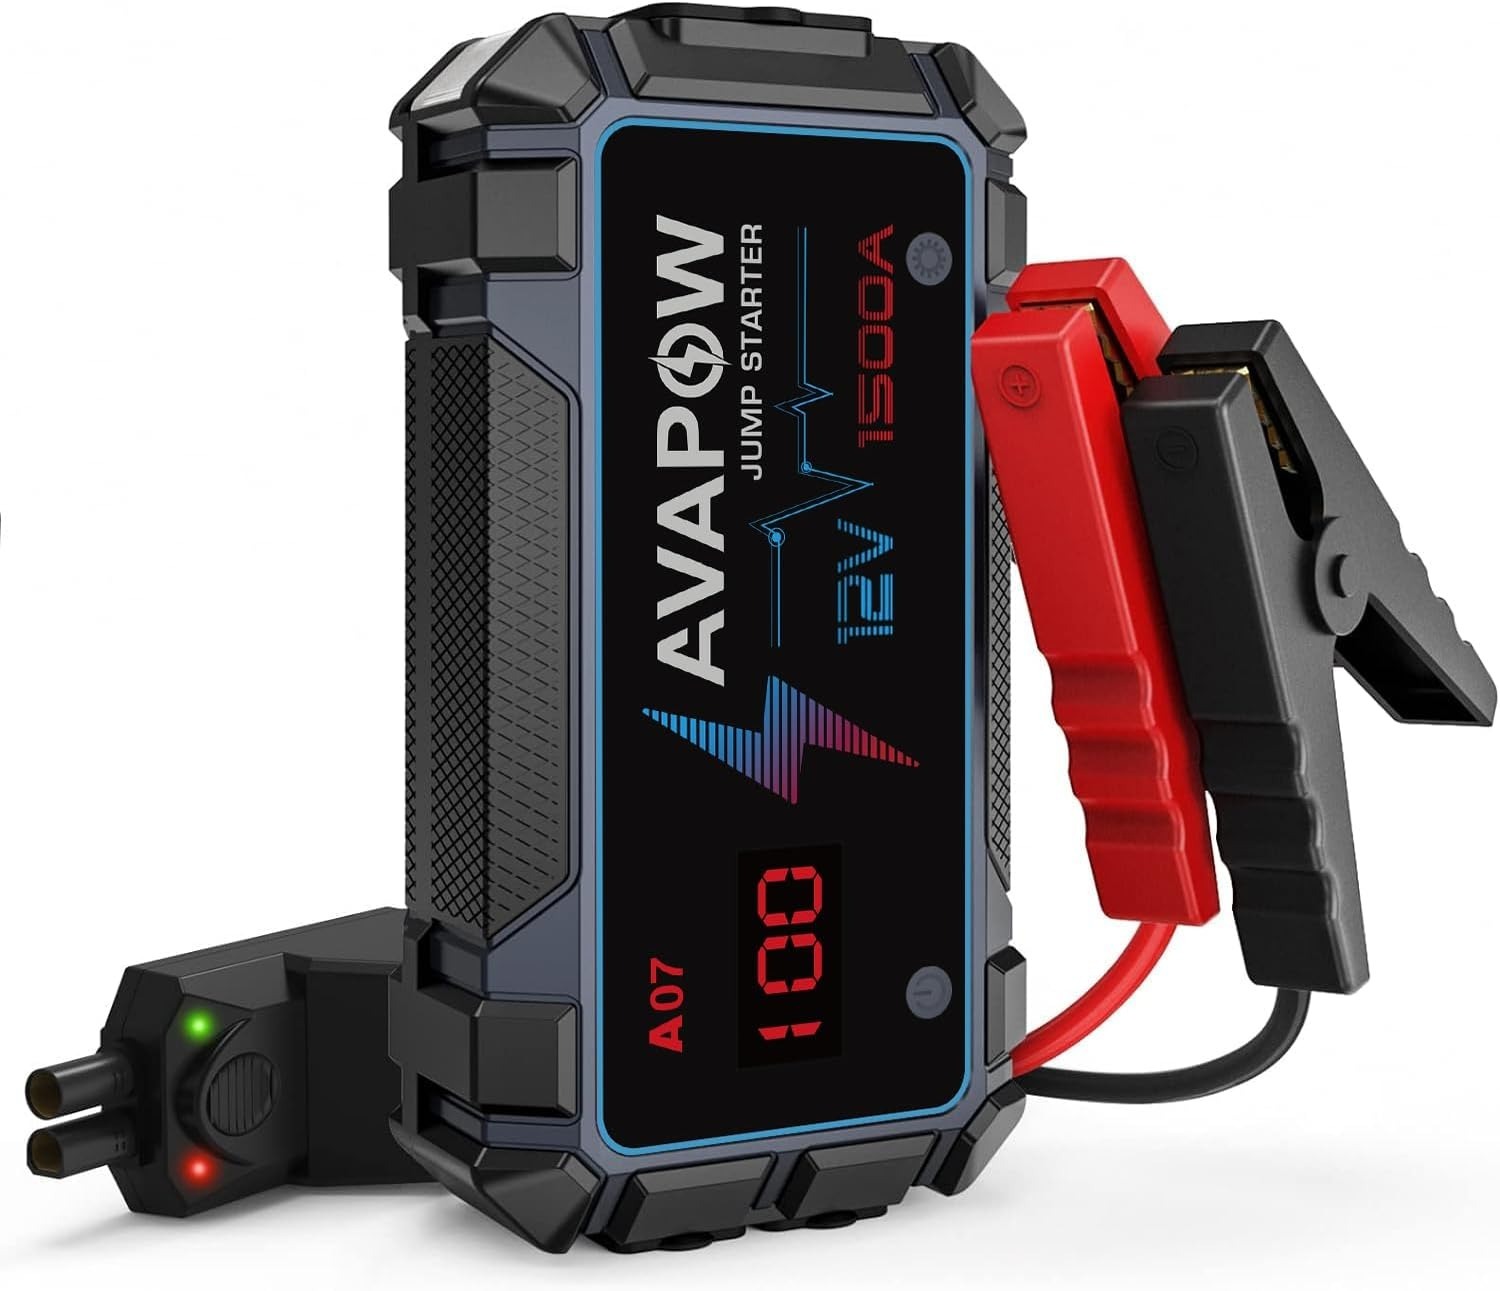 AVAPOW 1500A 12800mAh 12V Portable Jump Starter (up to 7L Gas/5.5L Diesel Engine) $28.79 + Free Shipping